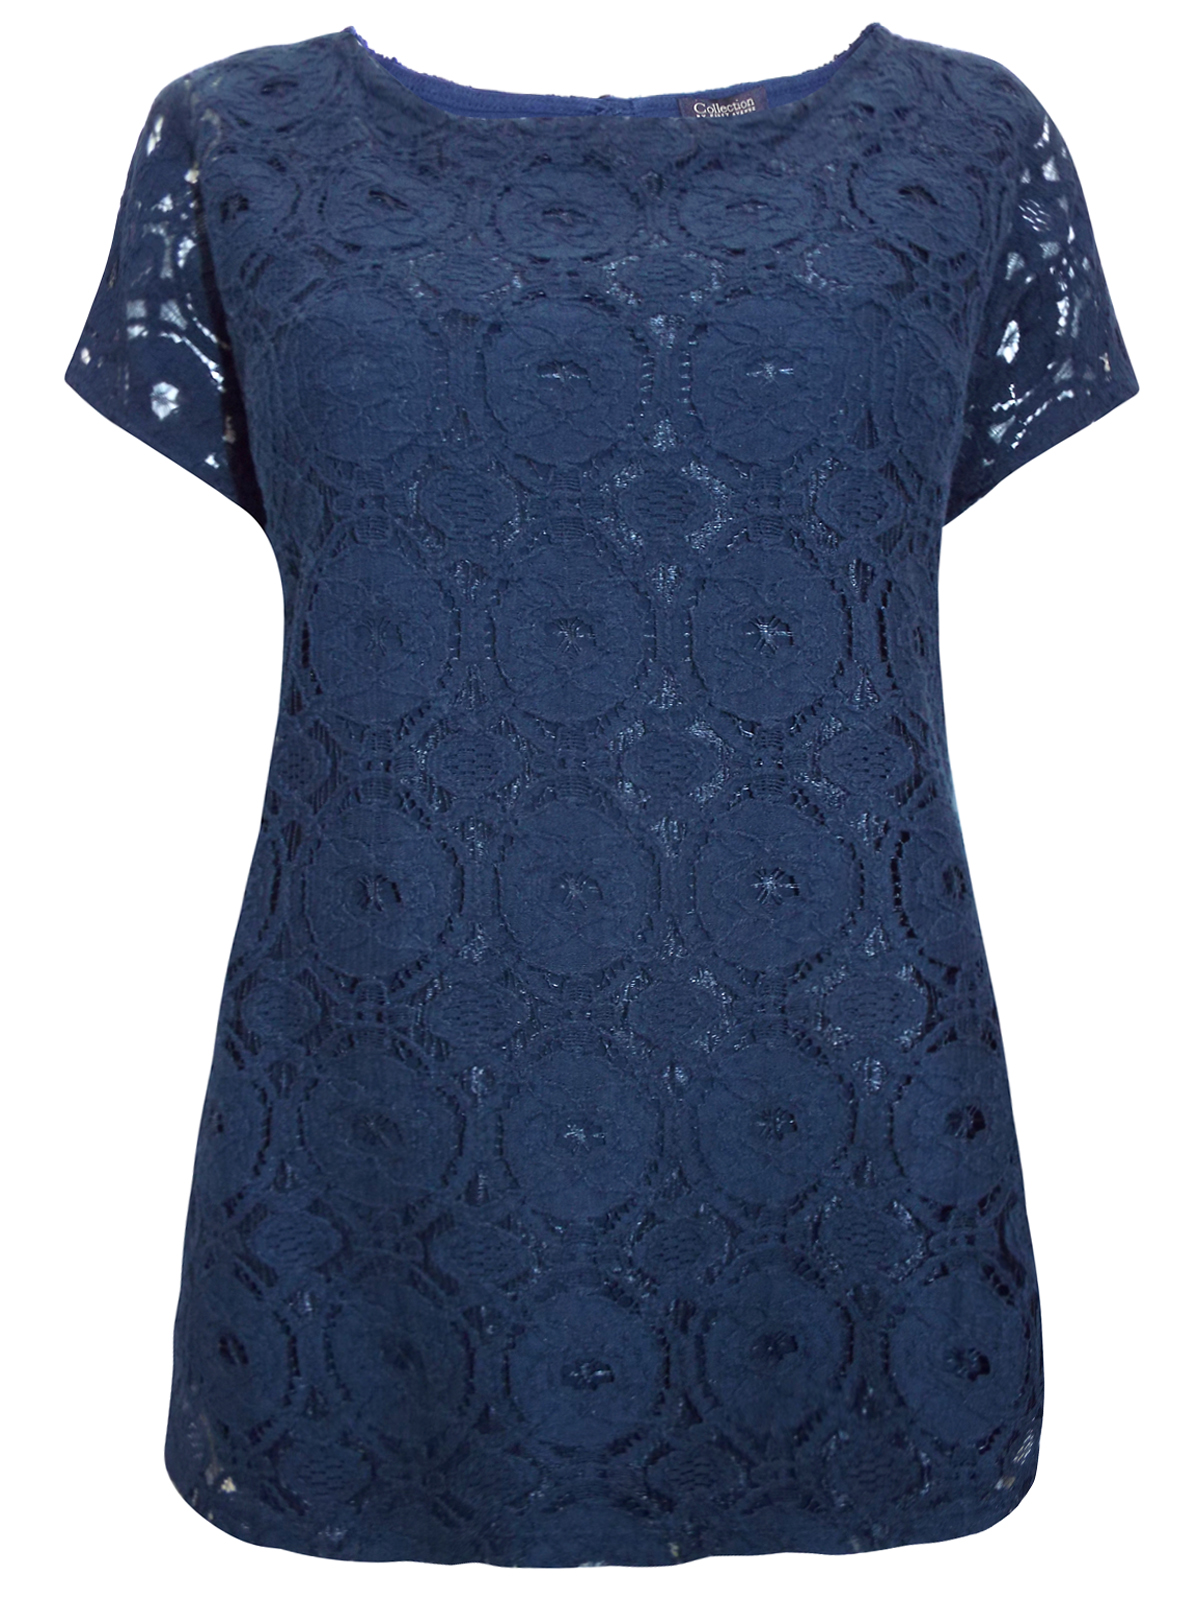 First Avenue NAVY All Over Lace Short Sleeve Top - Size 10 to 20